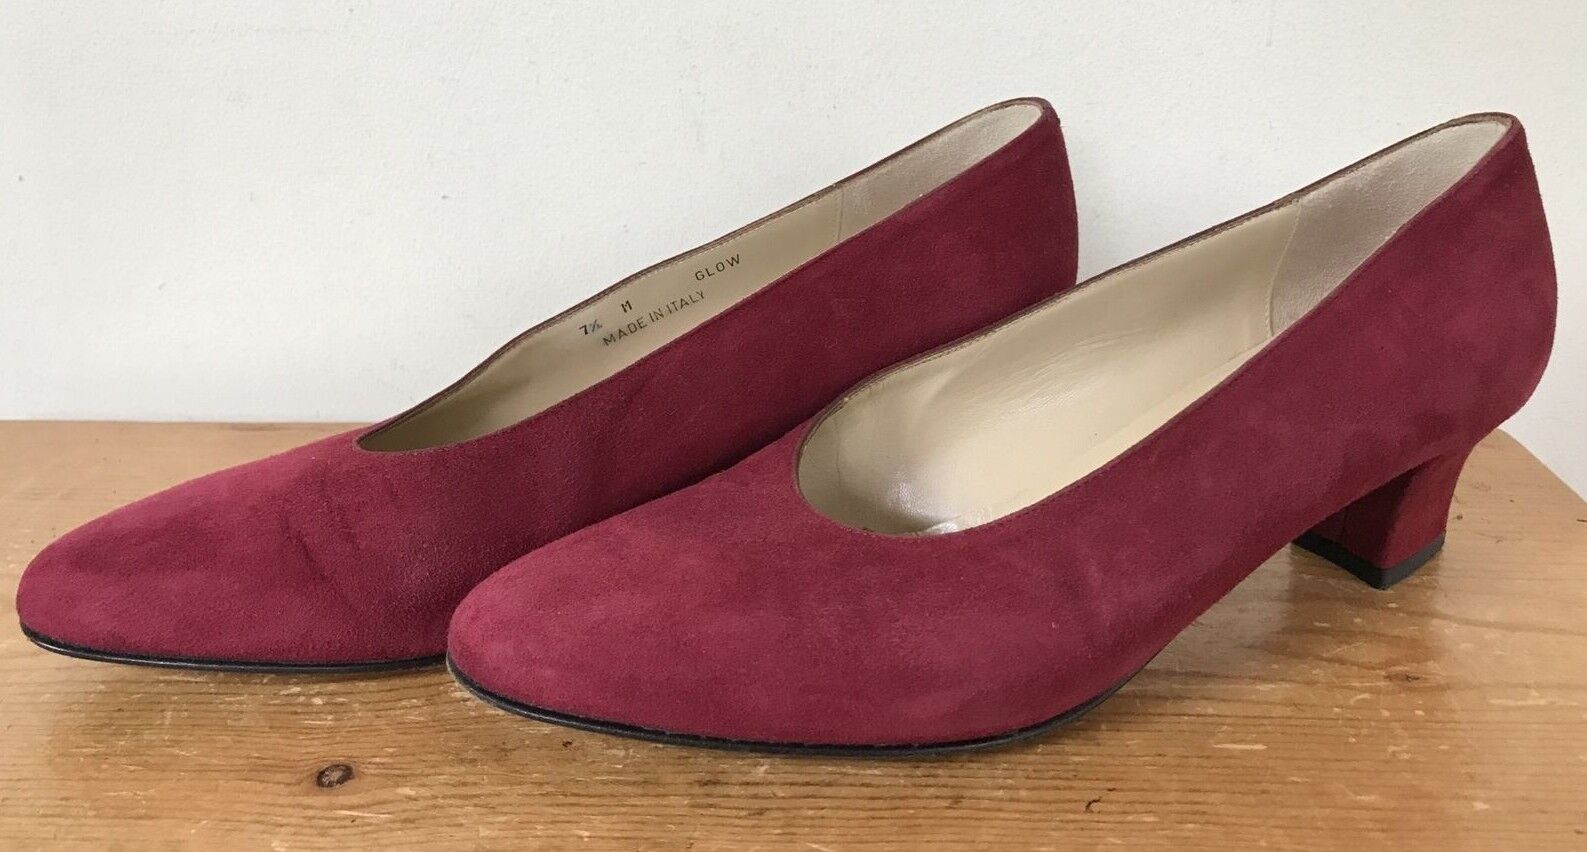 Primary image for Vintage Bally Italy Wine Red Suede Leather Glow Formal High Heels Pumps 7.5M 38